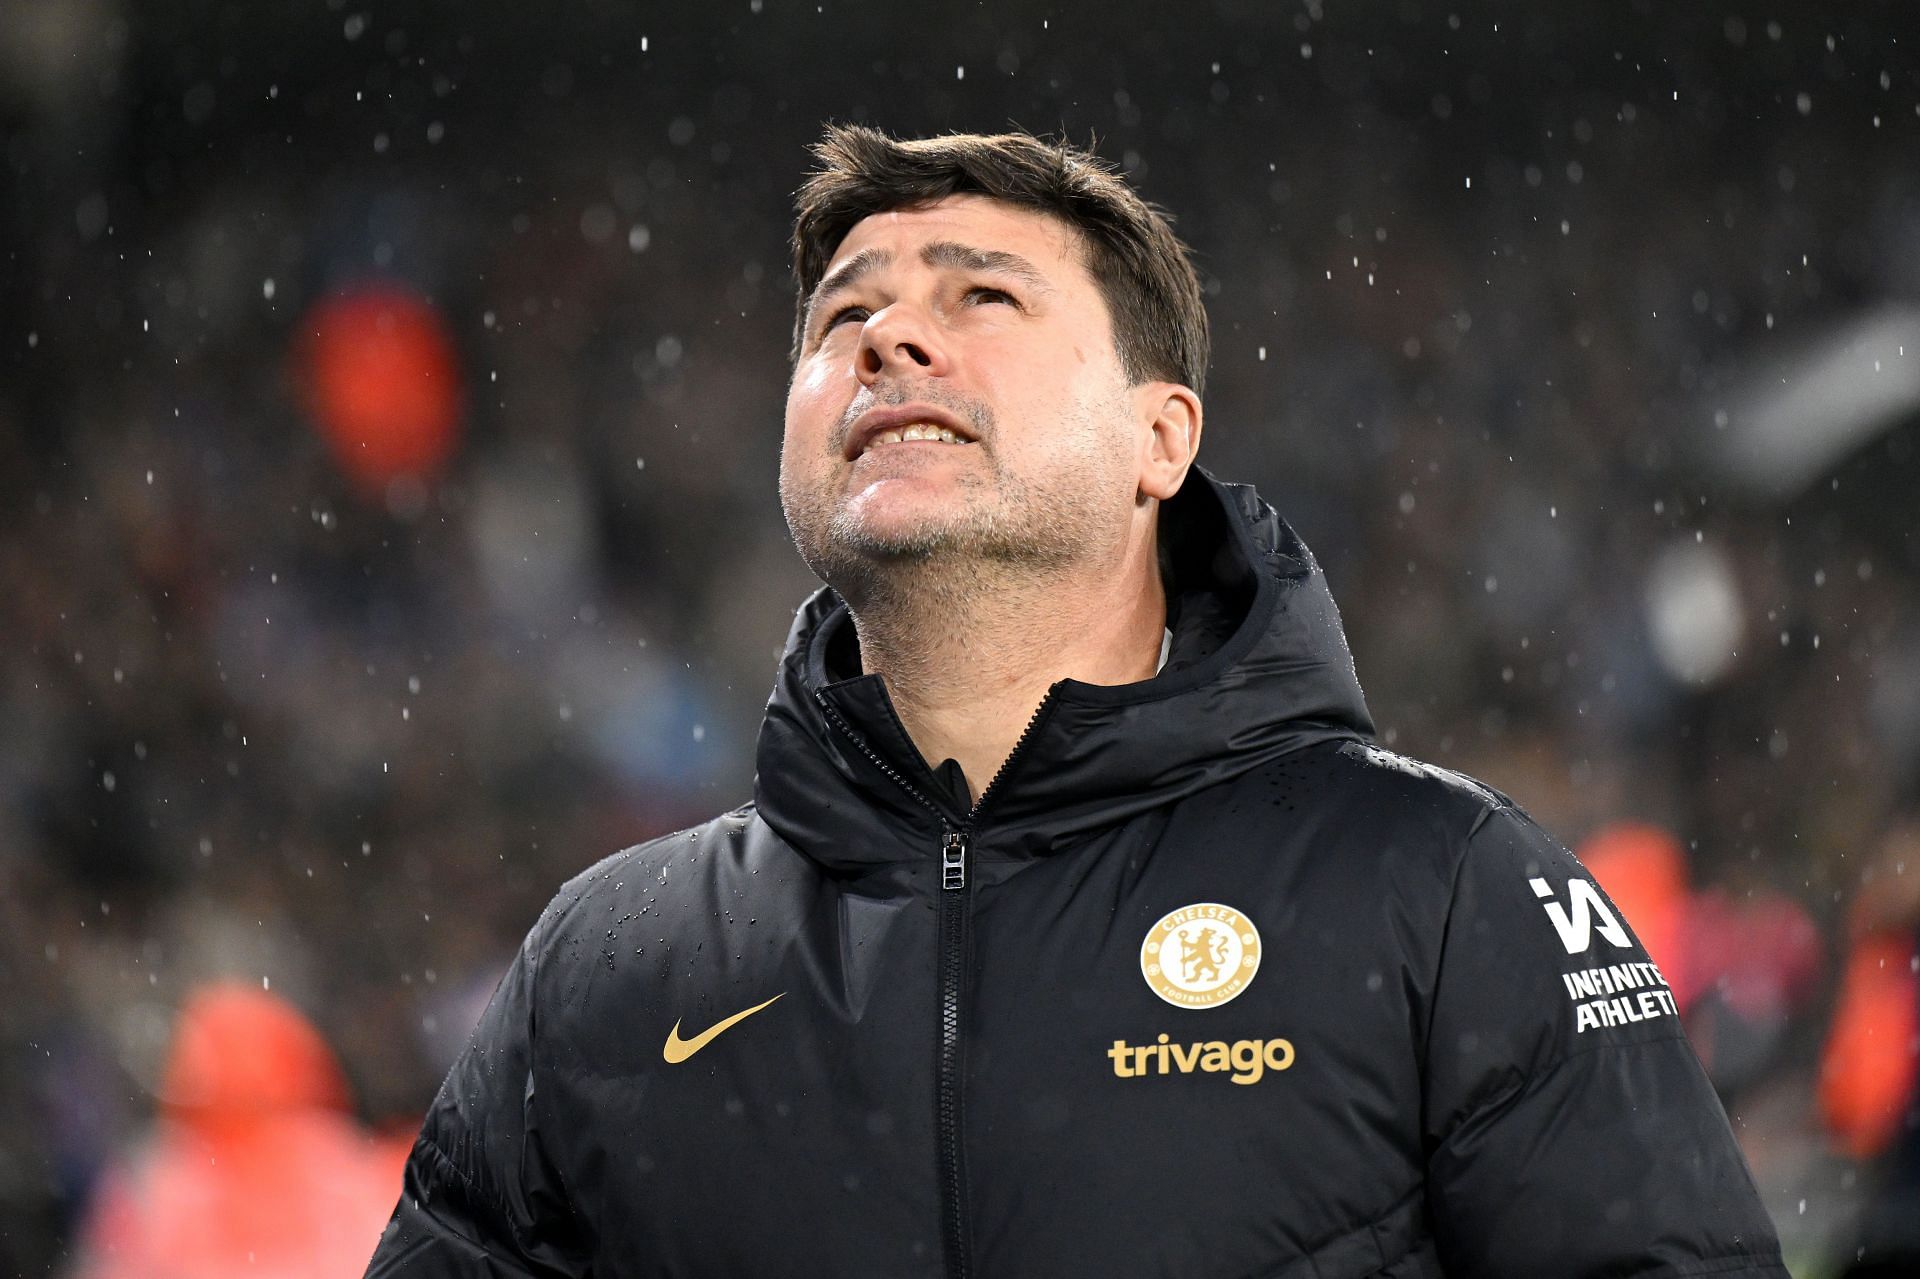 Mauricio Pochettino was adamant he received support after the Carabao Cup final loss.